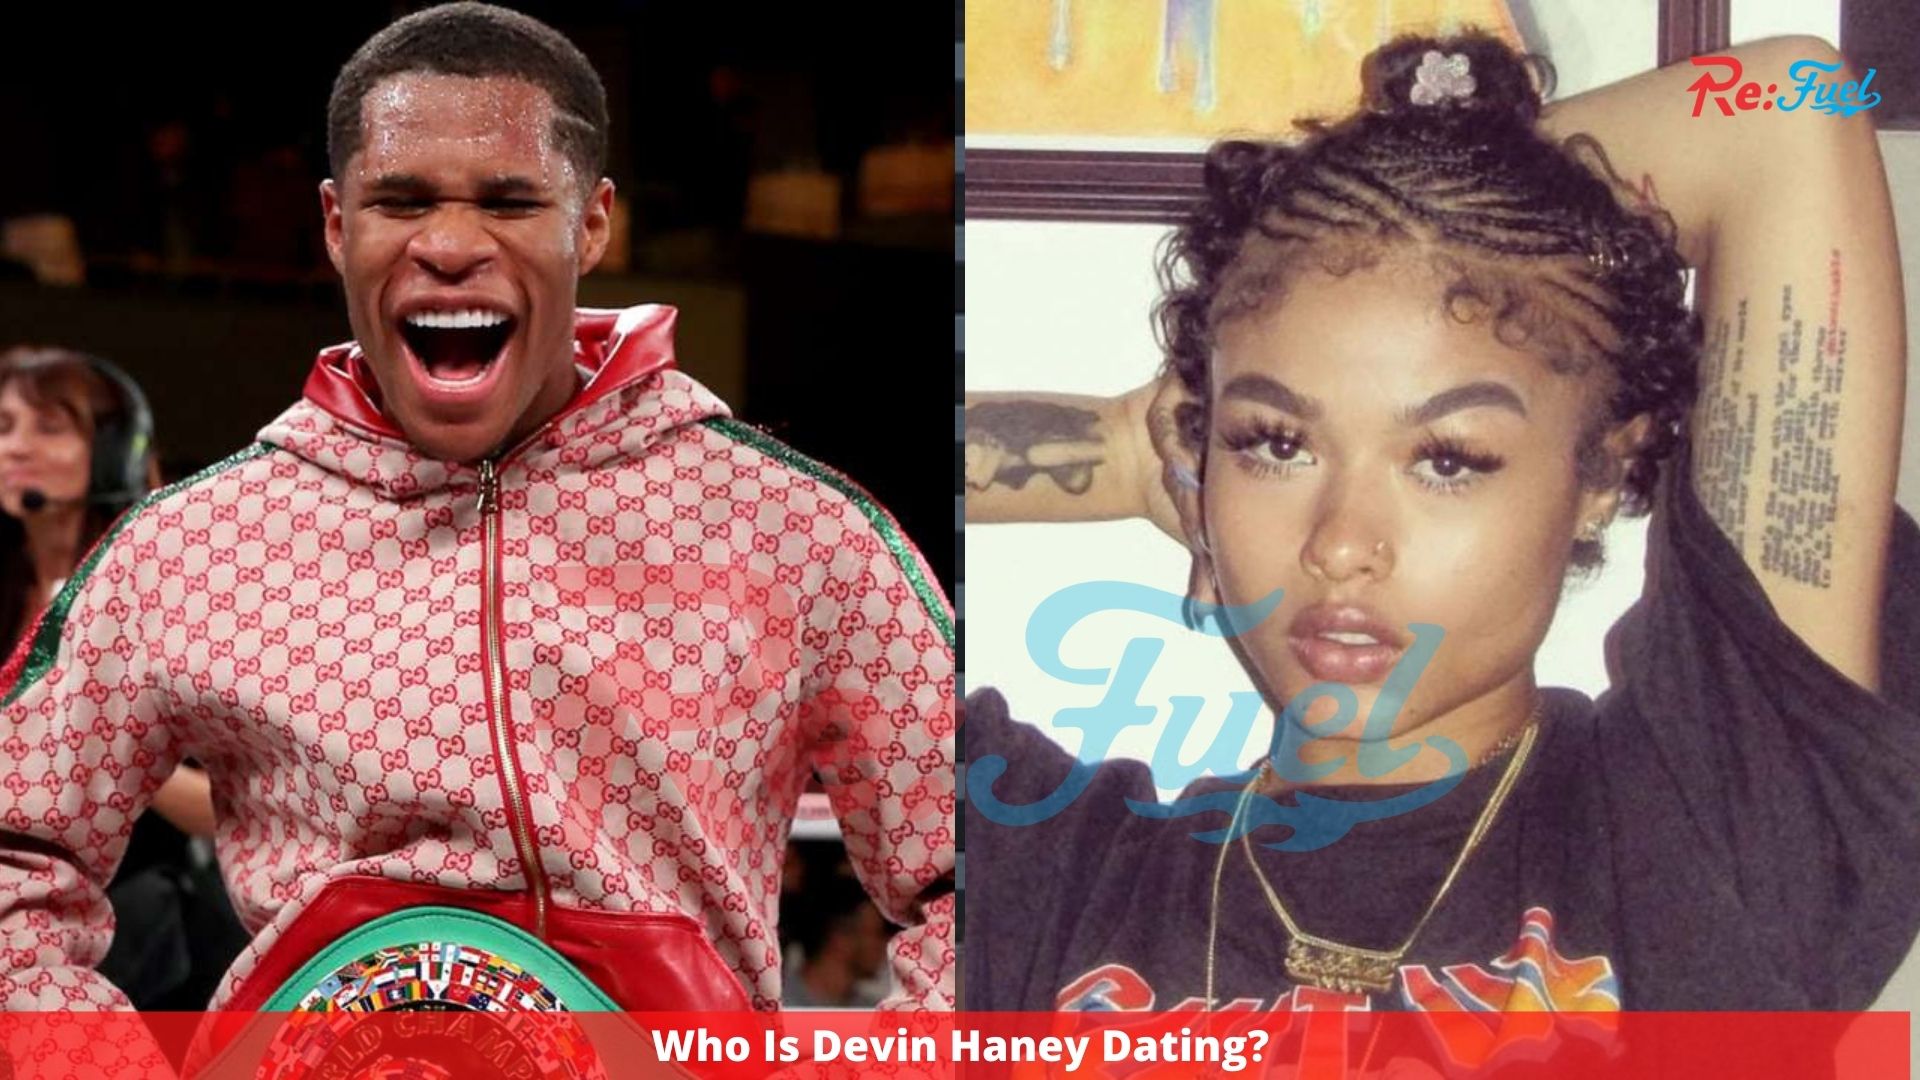 Who Is Devin Haney Dating?